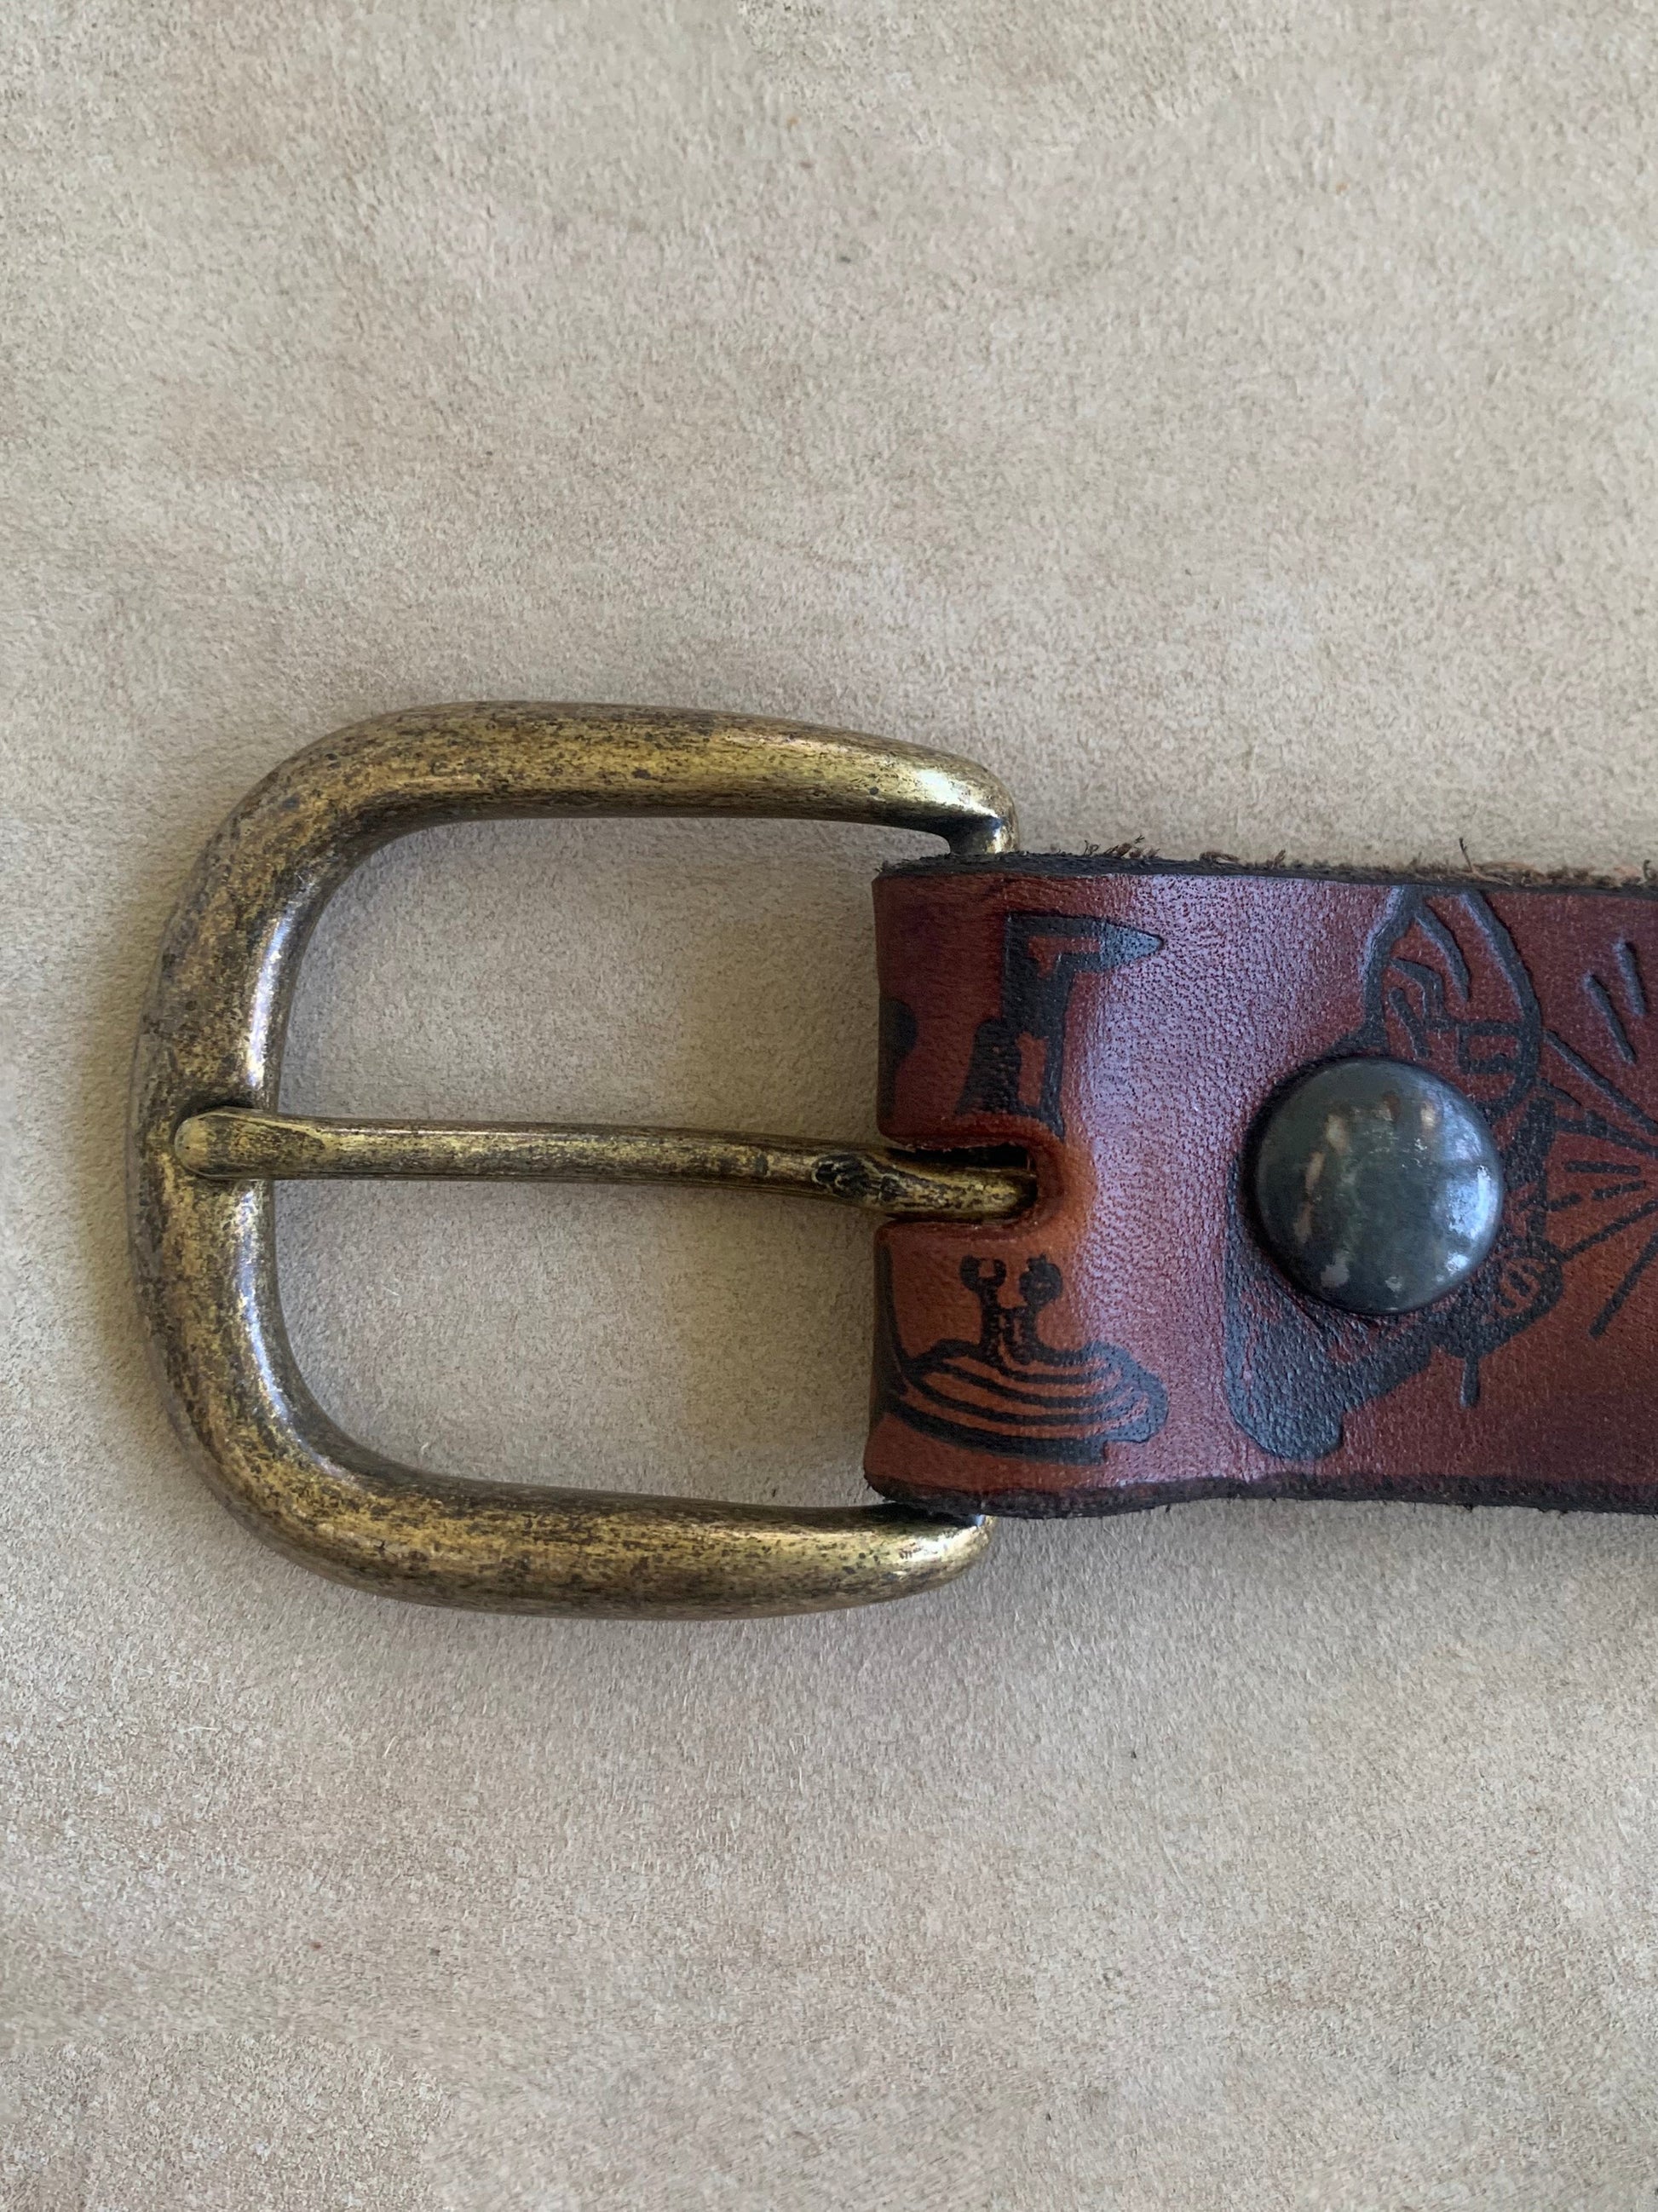 Cattle Leather Name Belt